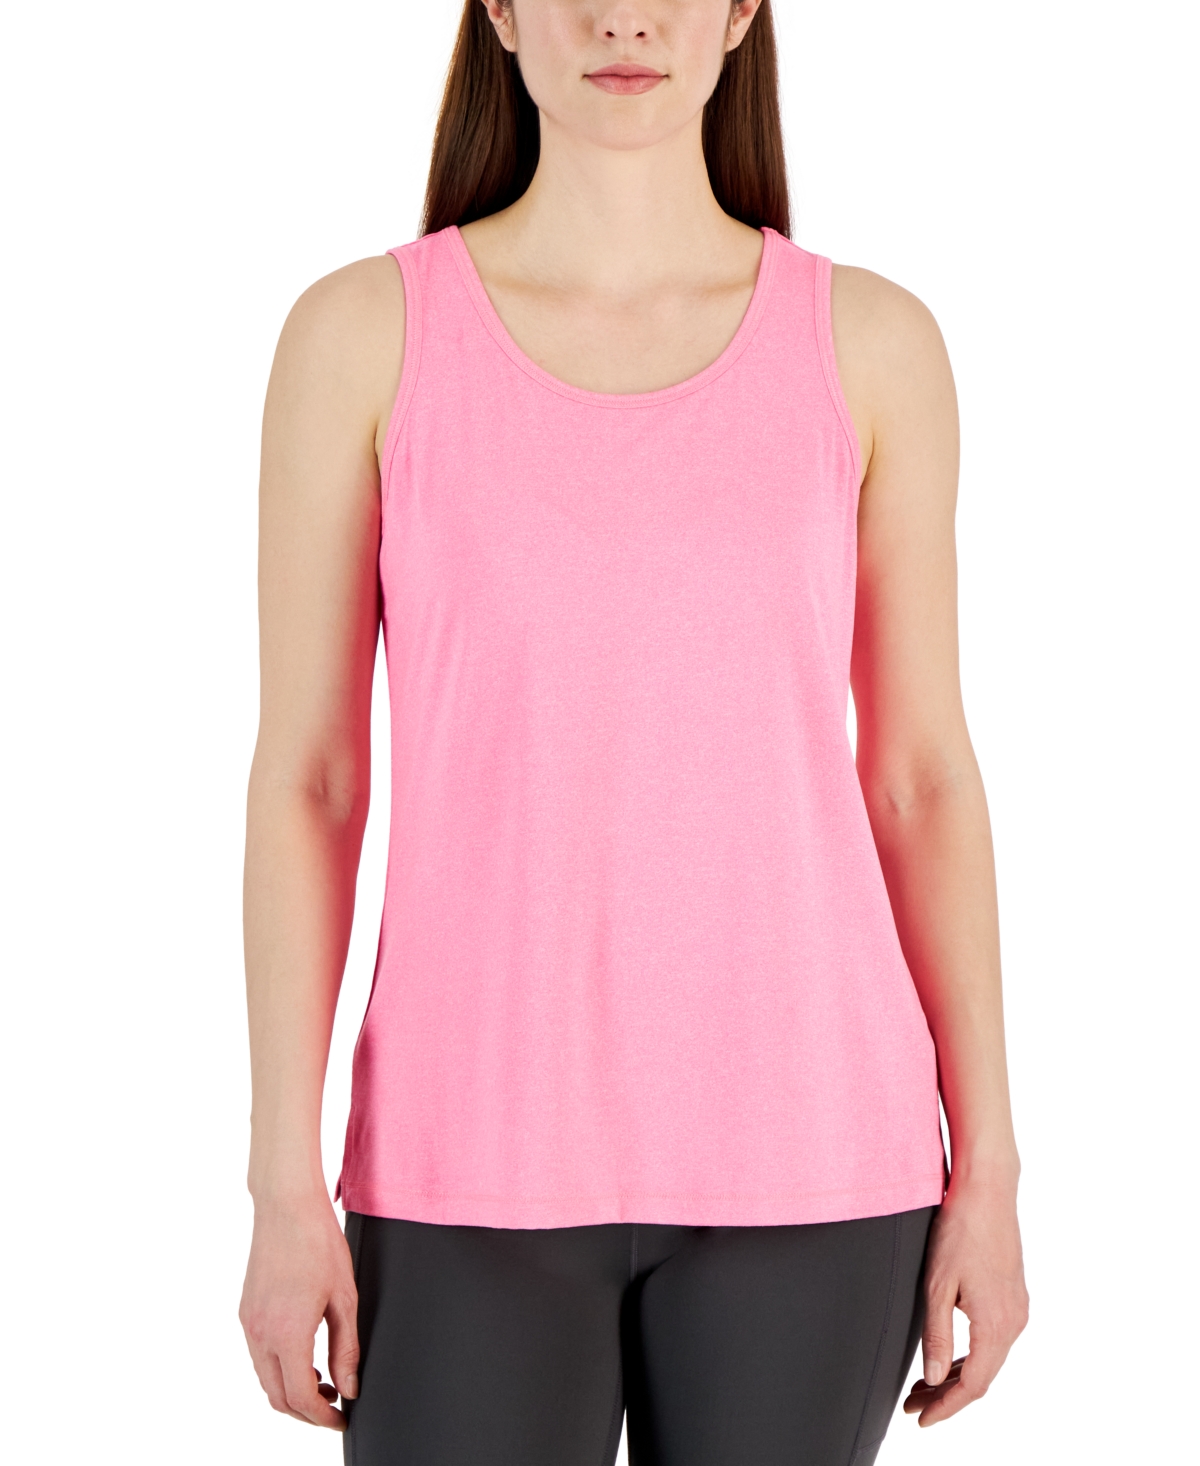 Women's Performance Muscle Tank Top, Created for Macy's - Navy Serenity